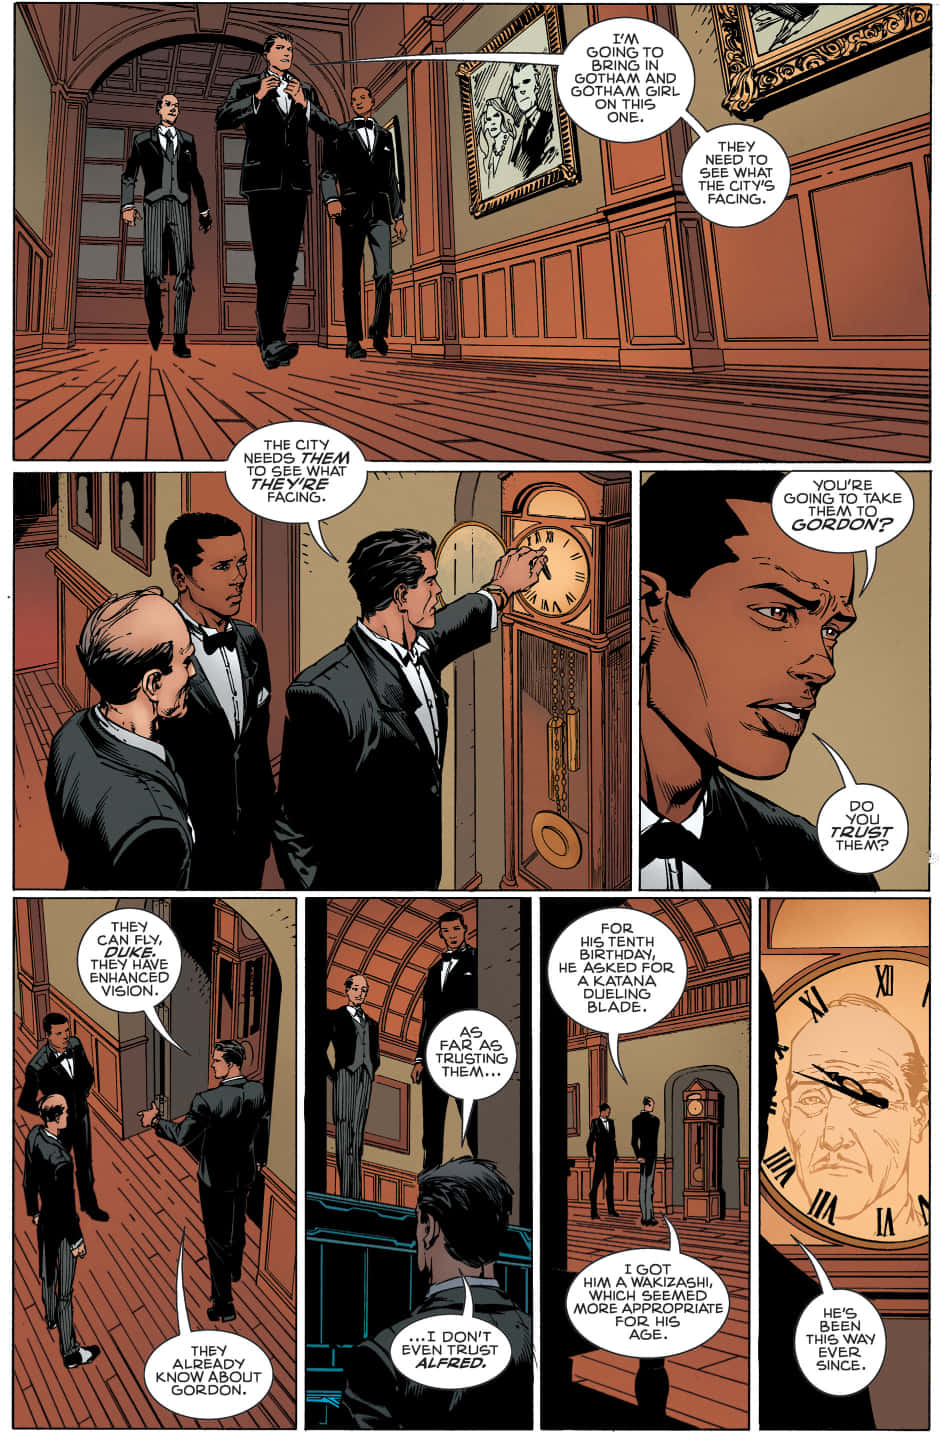 Alfred Pennyworth, the loyal butler and confidant of Batman Wallpaper